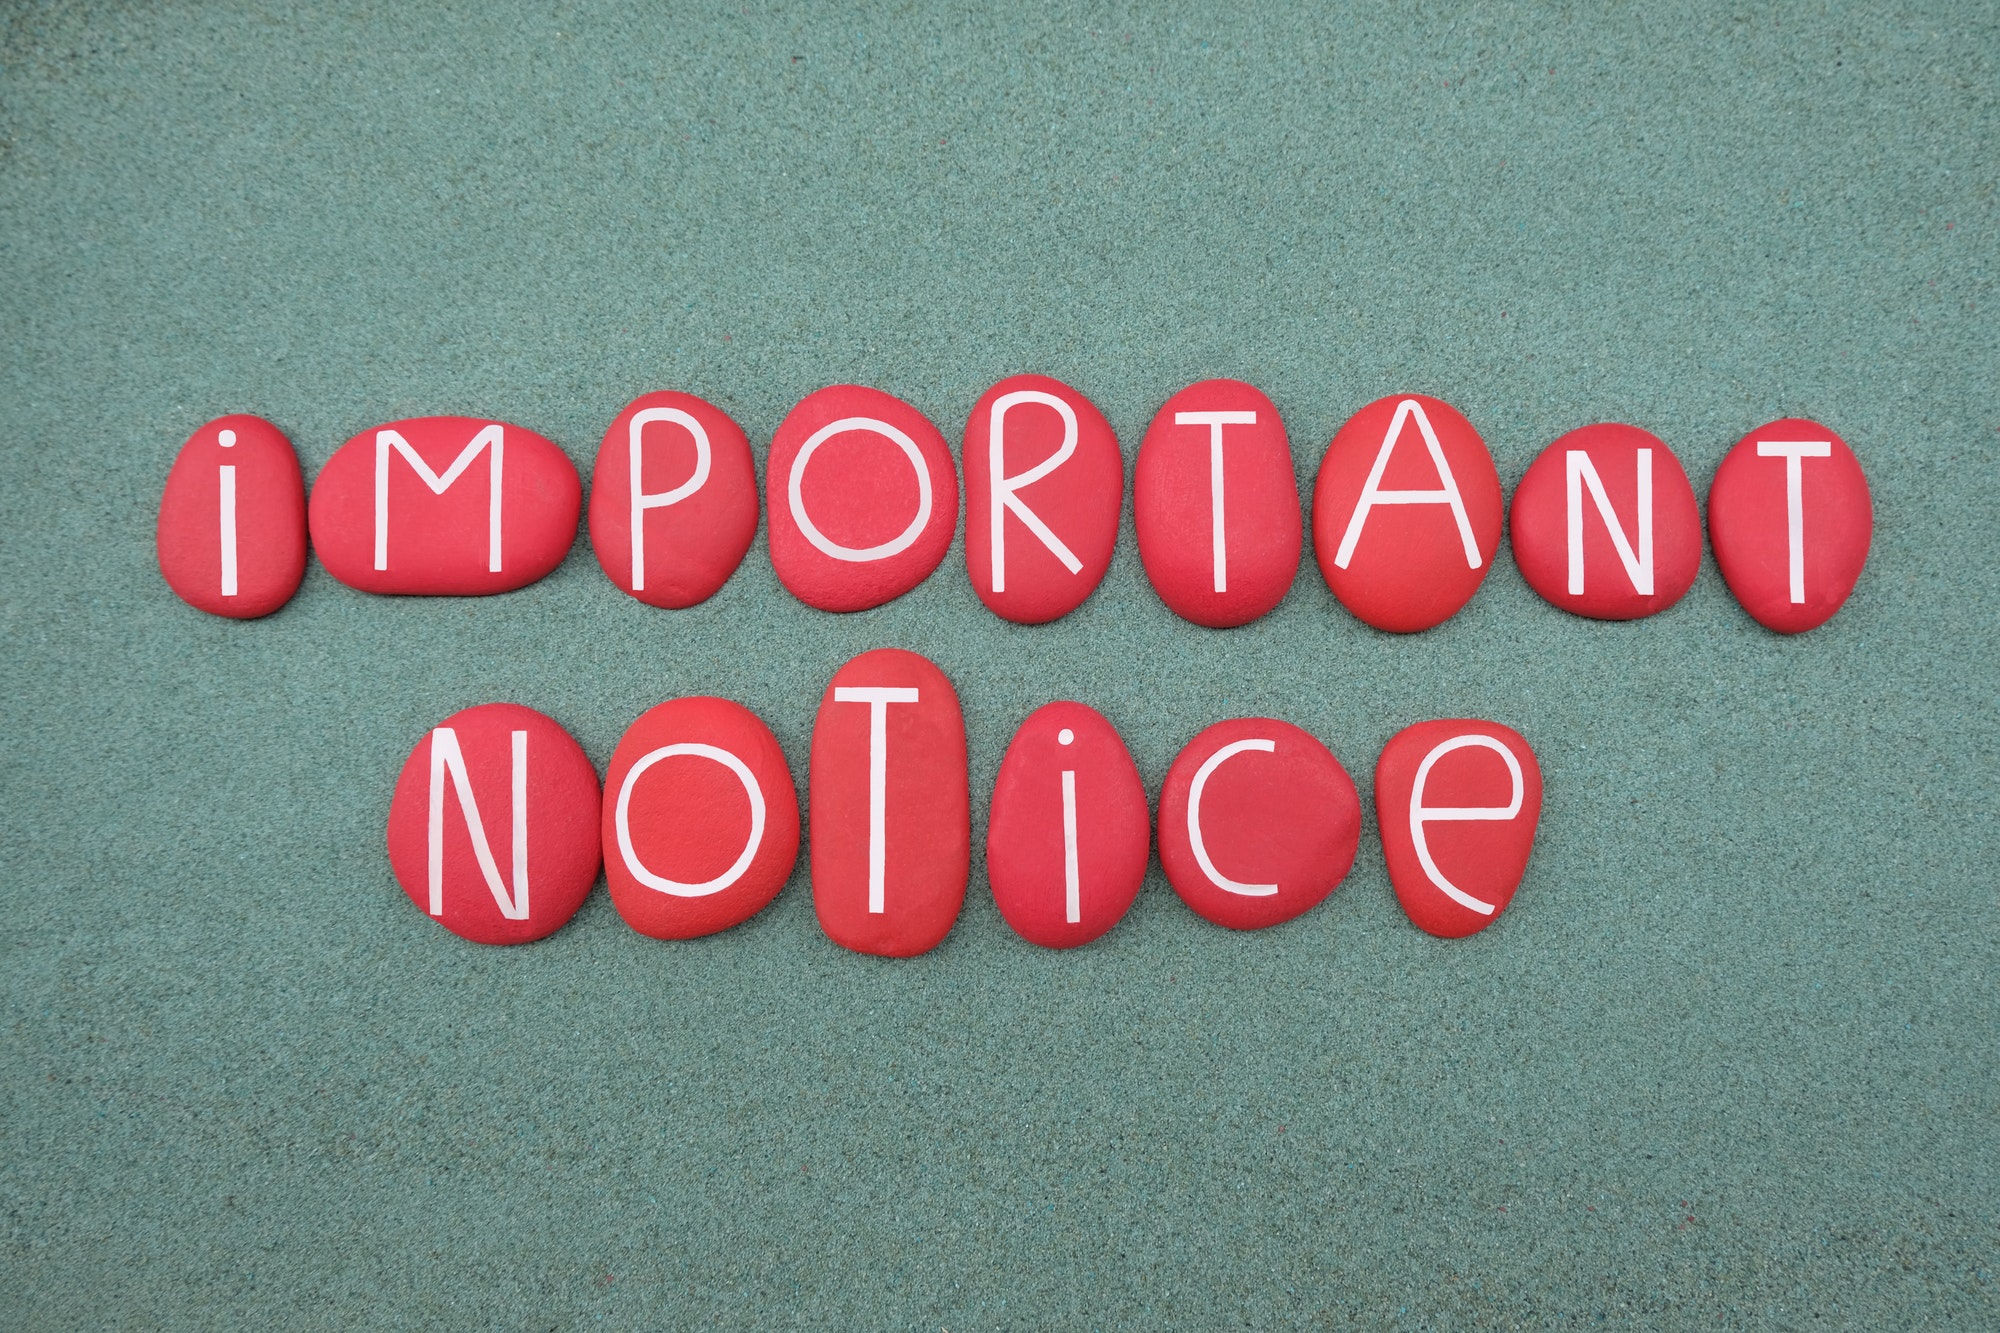 Important notice text composed with red colored stone letters over green sand